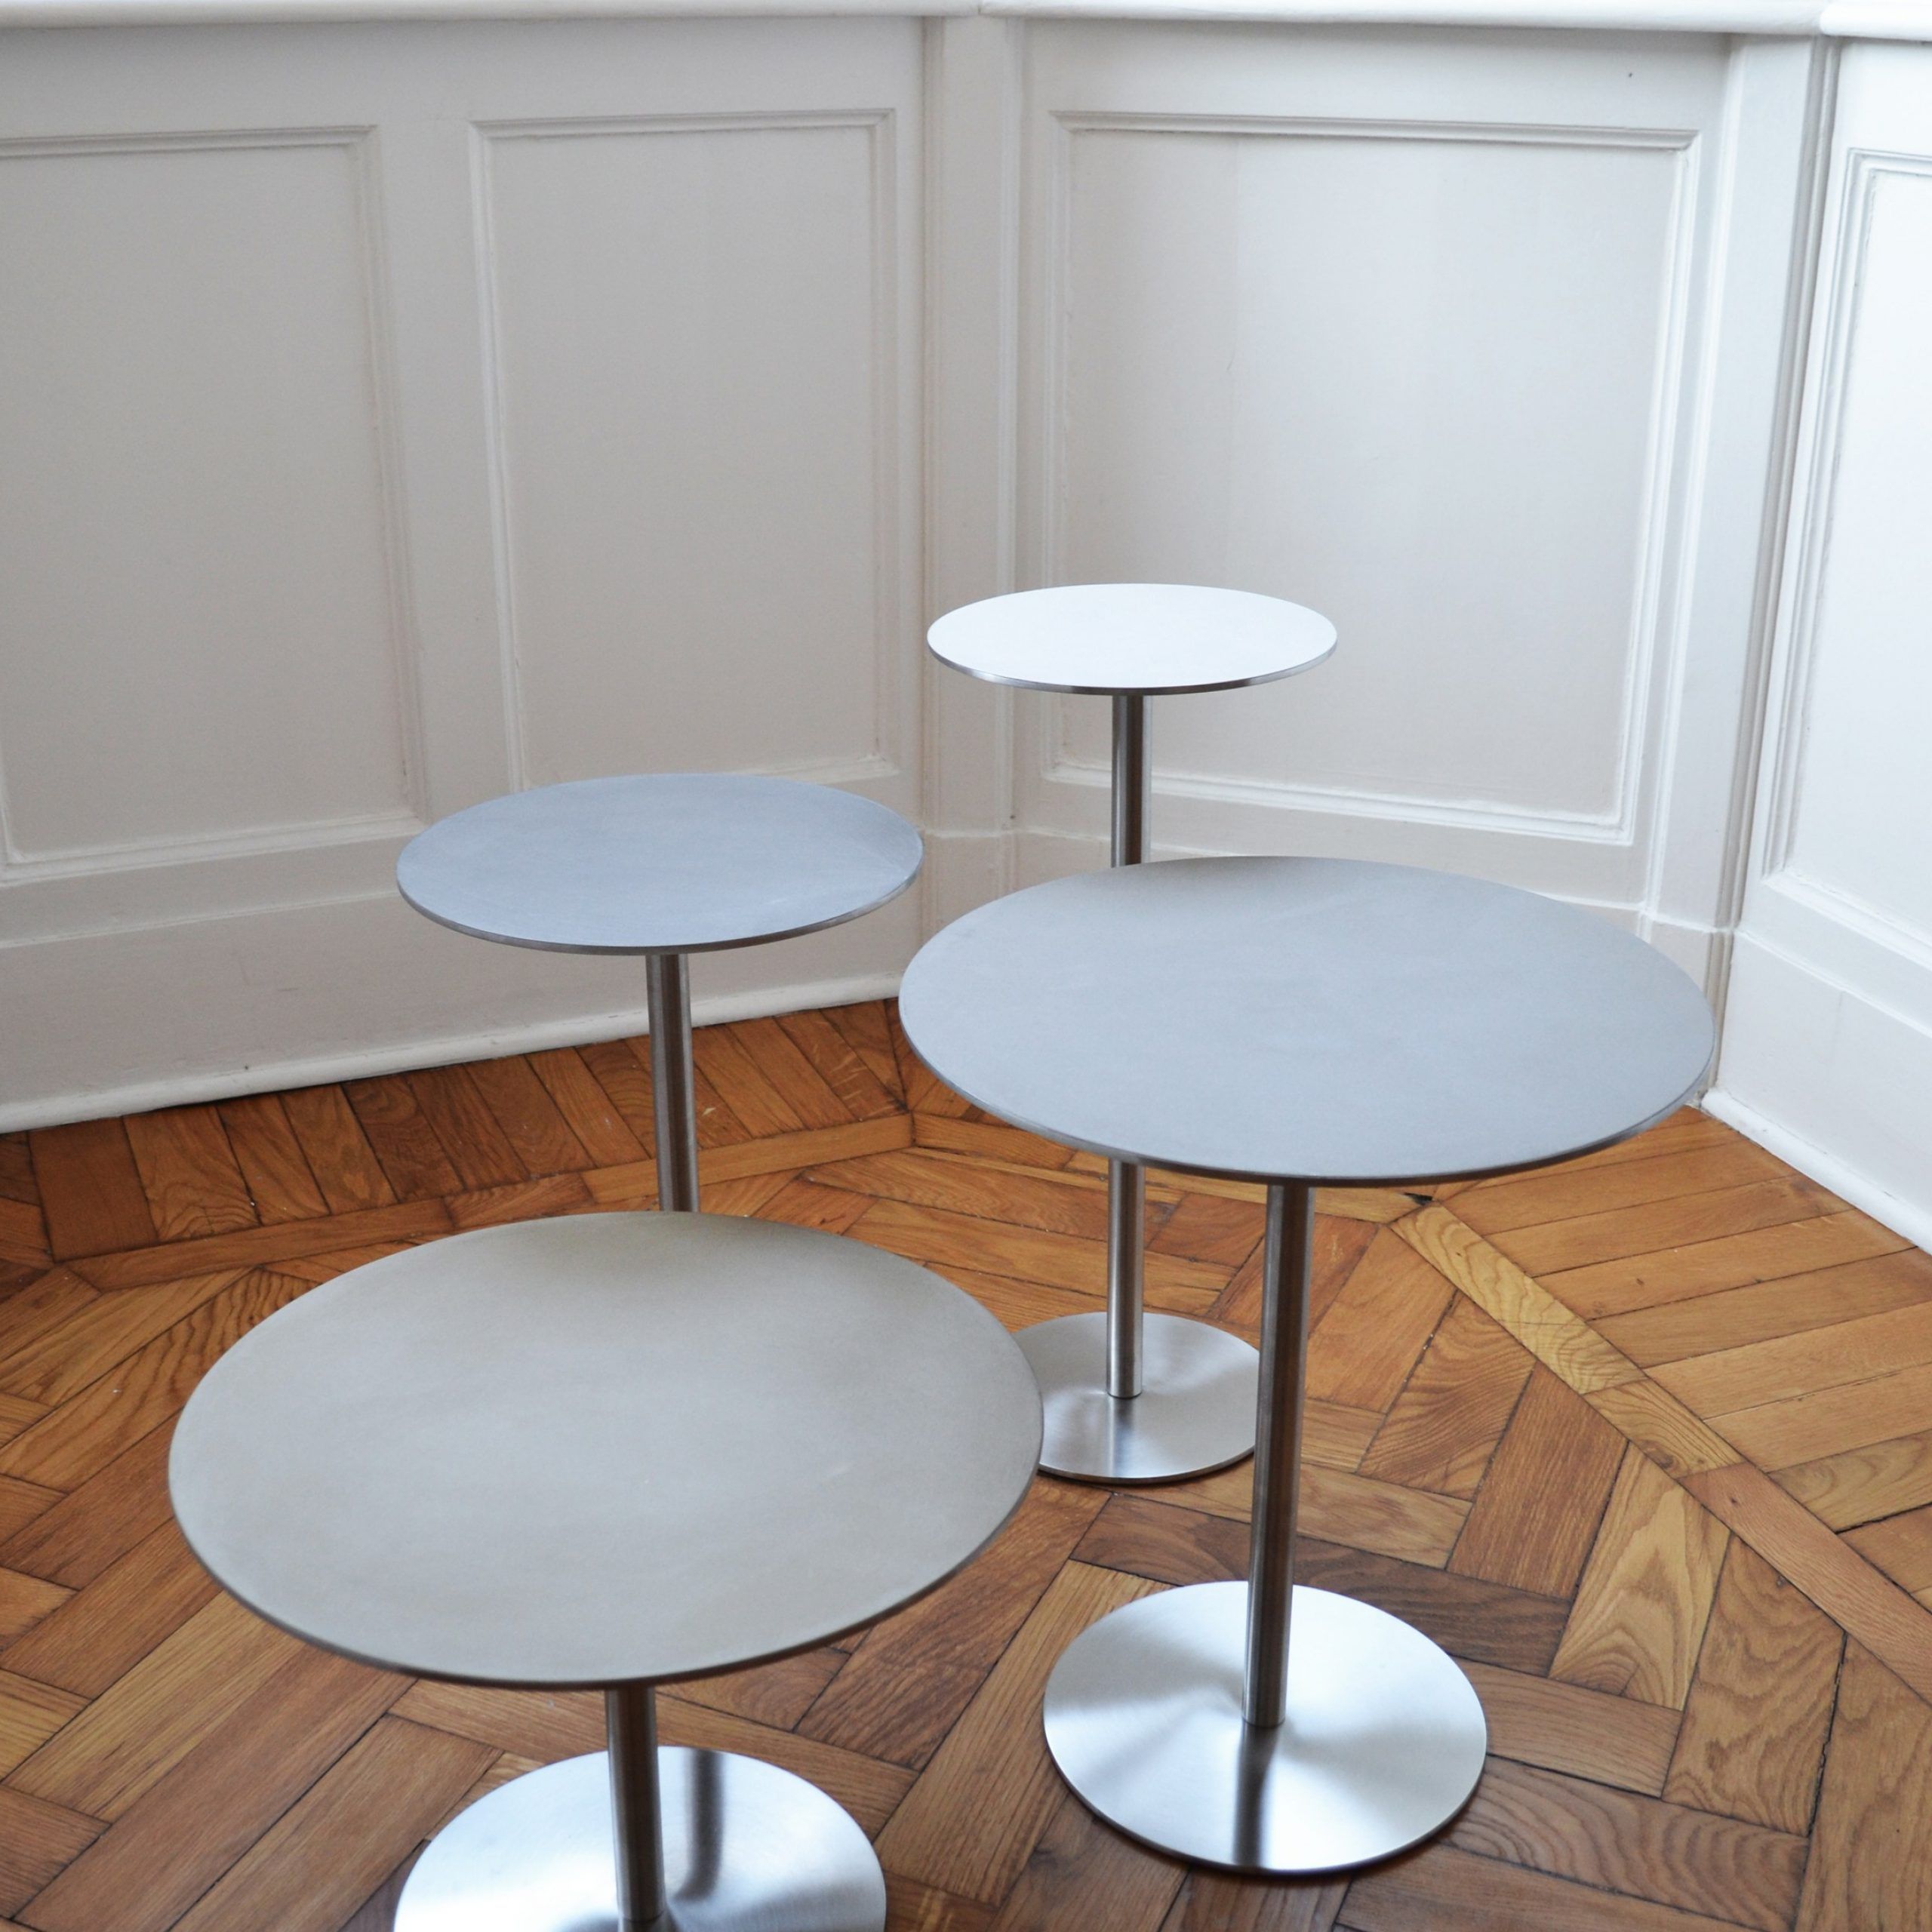 Round Stainless Steel Coffee Table Estermg12 Design Monica Freitas In Popular Metal Coffee Tables (View 1 of 10)